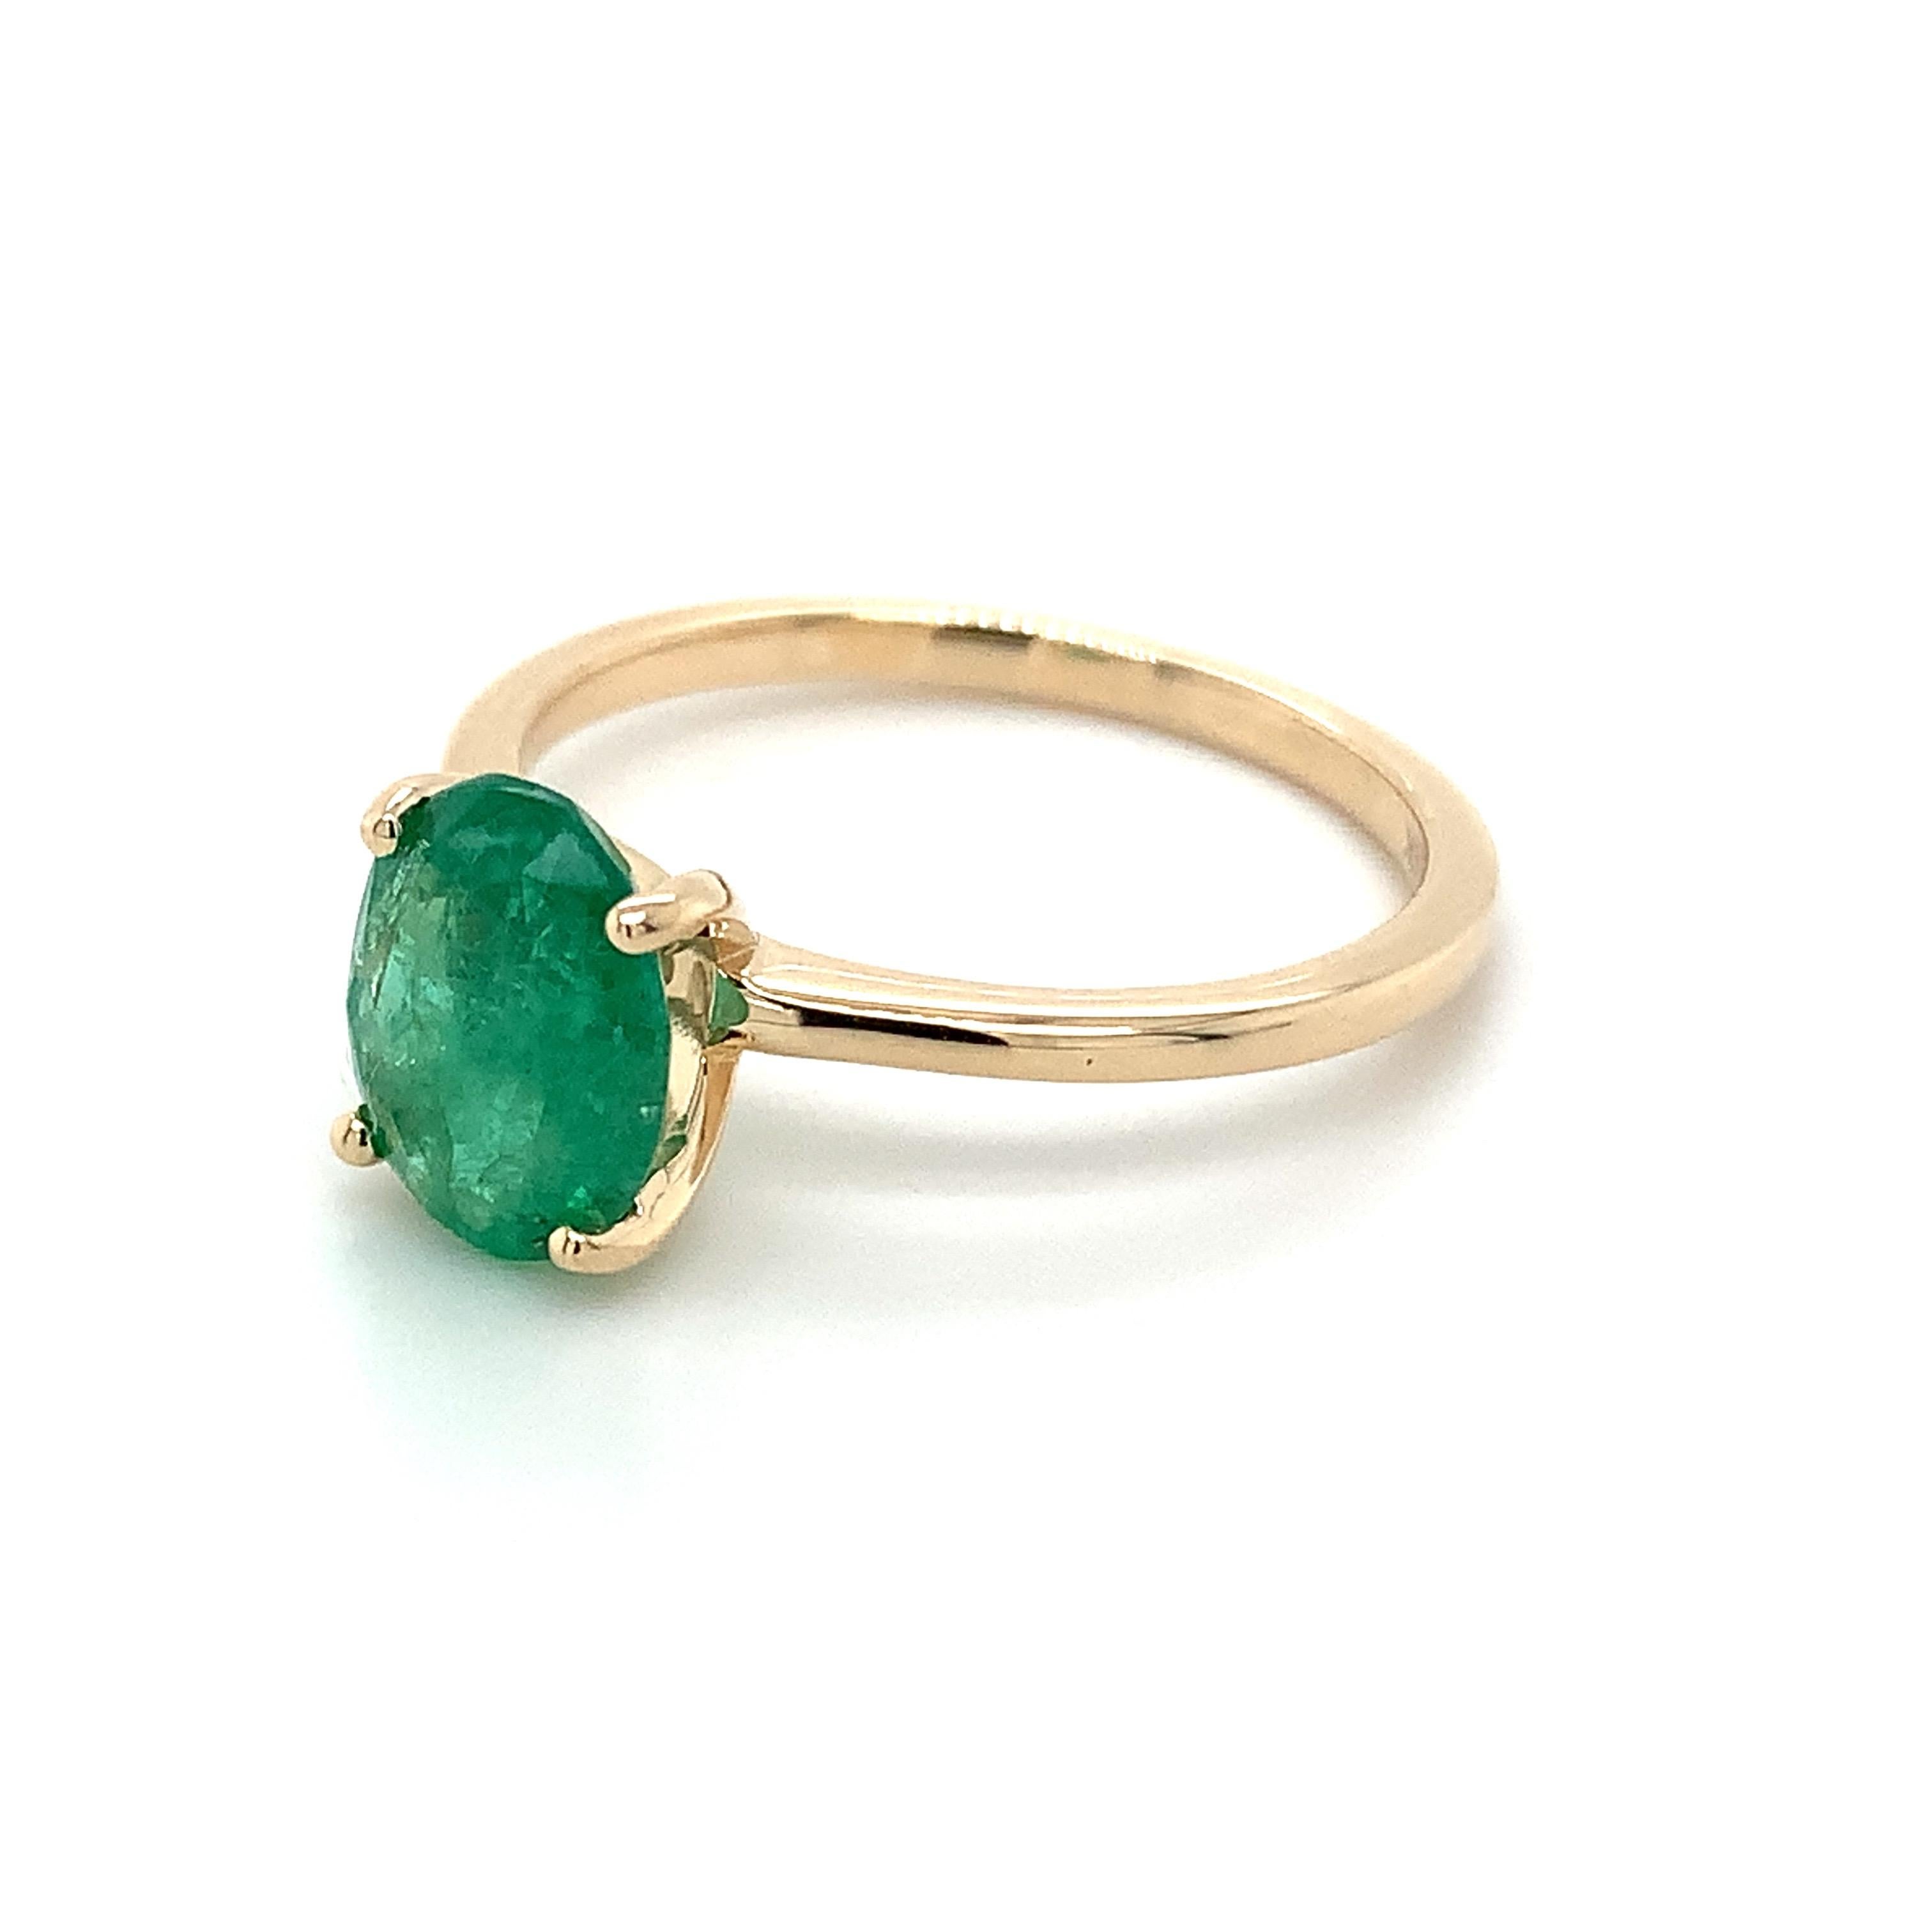 Oval cut Emerald gemstone beautifully crafted in a 10K yellow gold ring.

With a vibrant green color hue. The birthstone for May is a symbol of renewed spring growth. Explore a vast range of precious stone Jewelry in our store. 

Centre stone is an